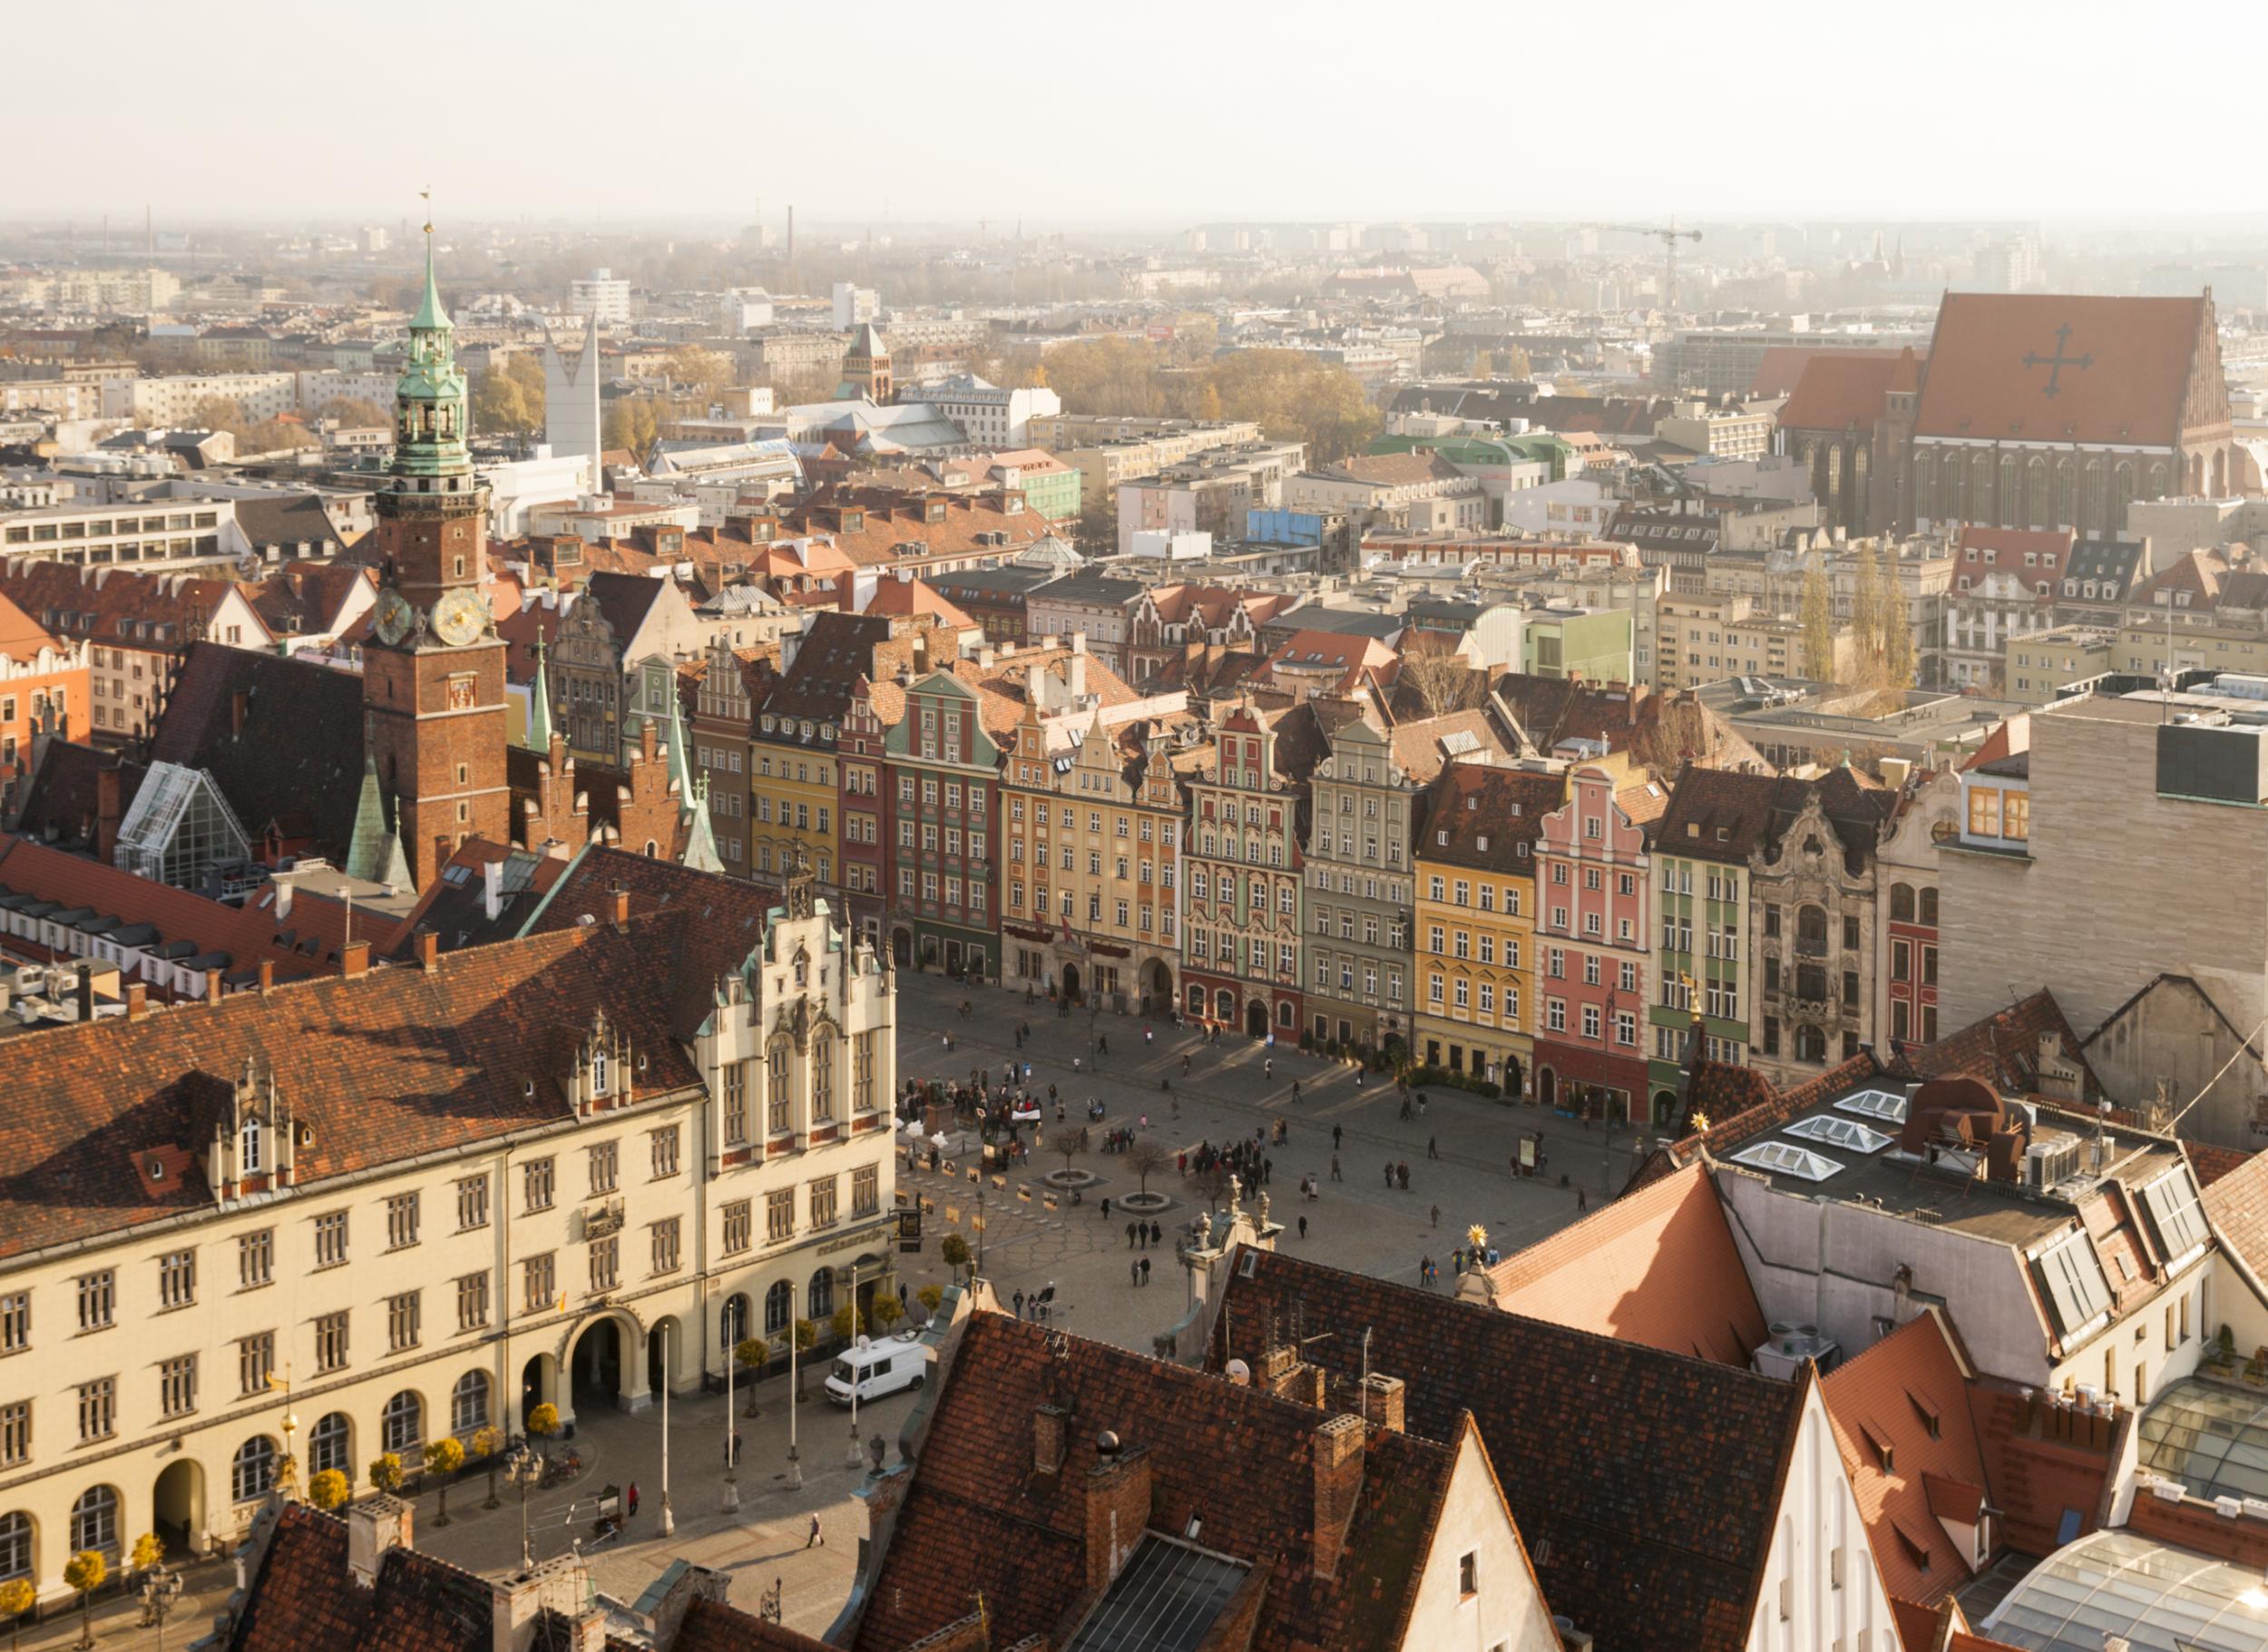 Wrocław's historic Old Town Square is packed with elegant architecture